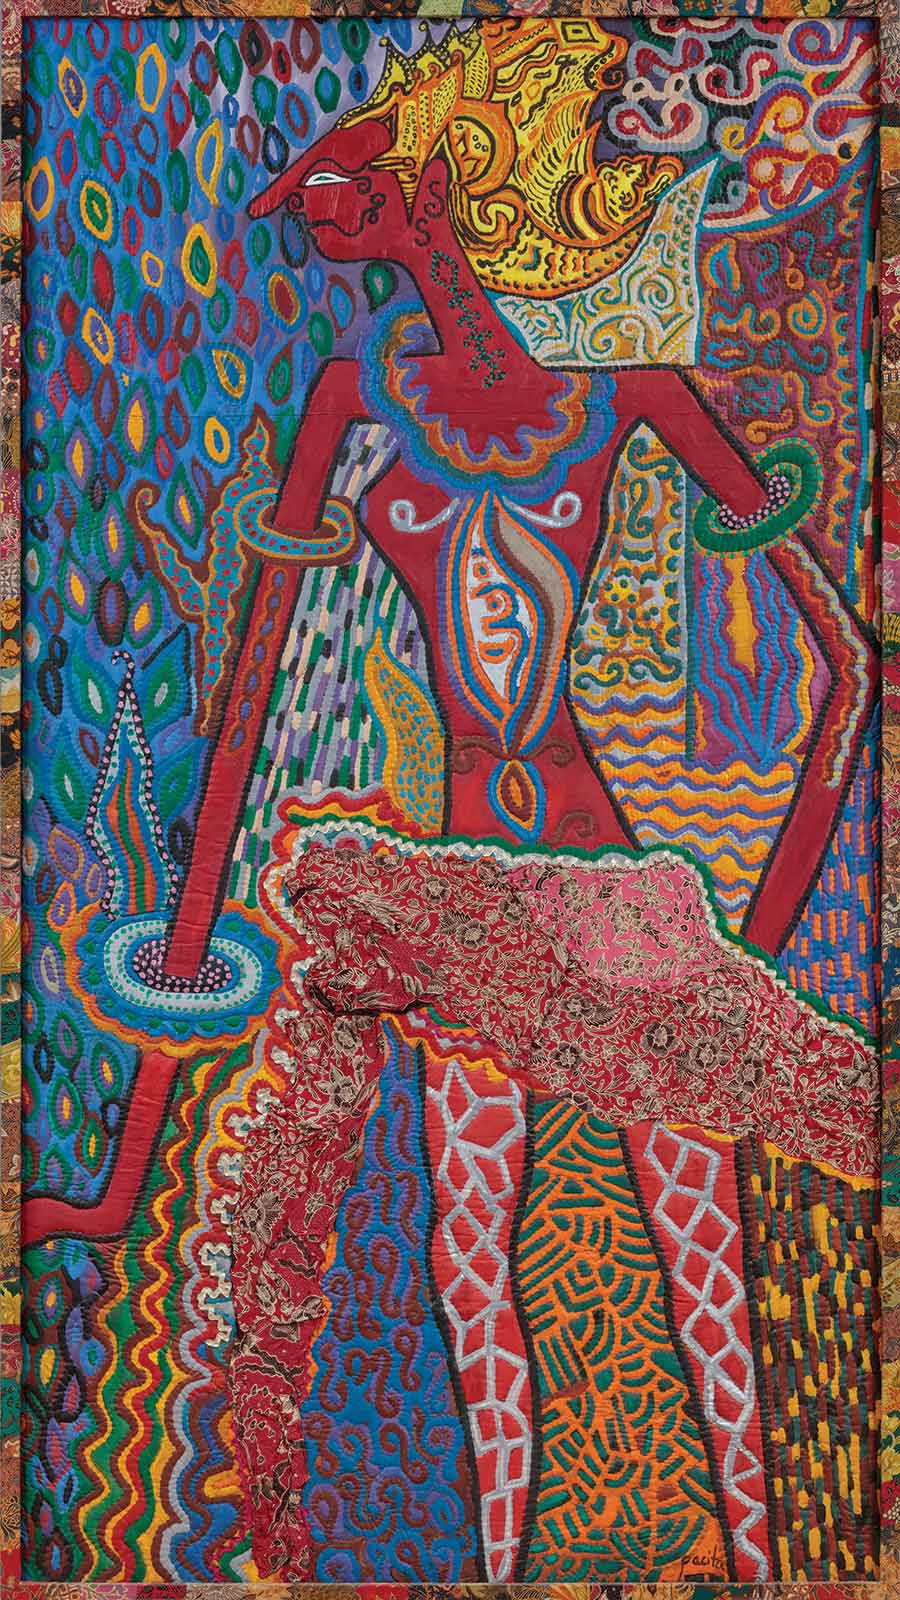 Rama, by Pacita Abad (Basco, Philippines, 1946–2004, Singapore), from the “Masks and Spirits” series, 1982. 